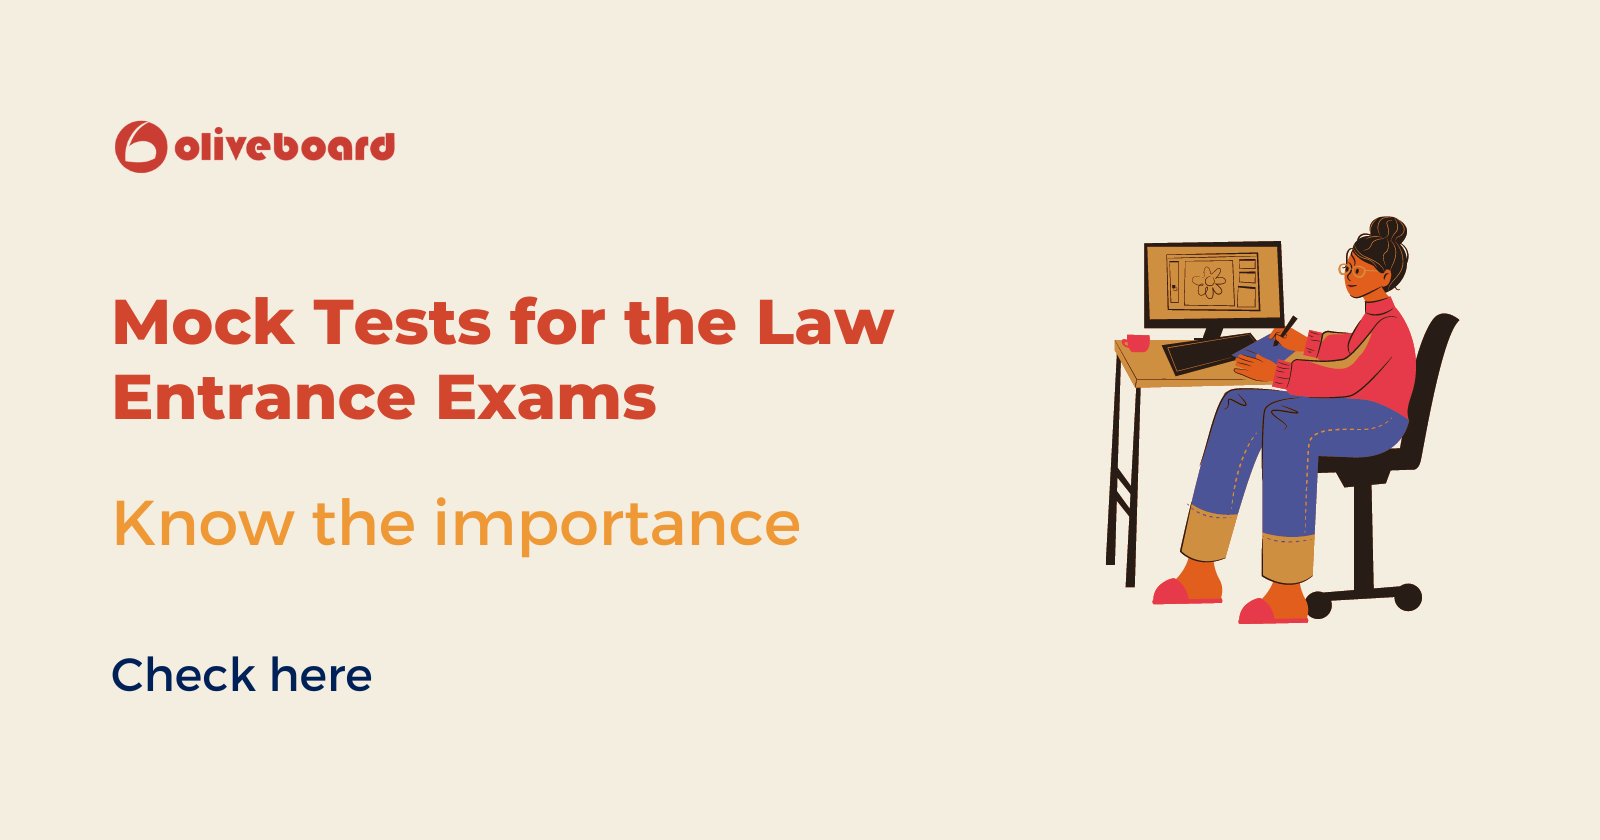 Mock Tests for the Law Entrance Exams